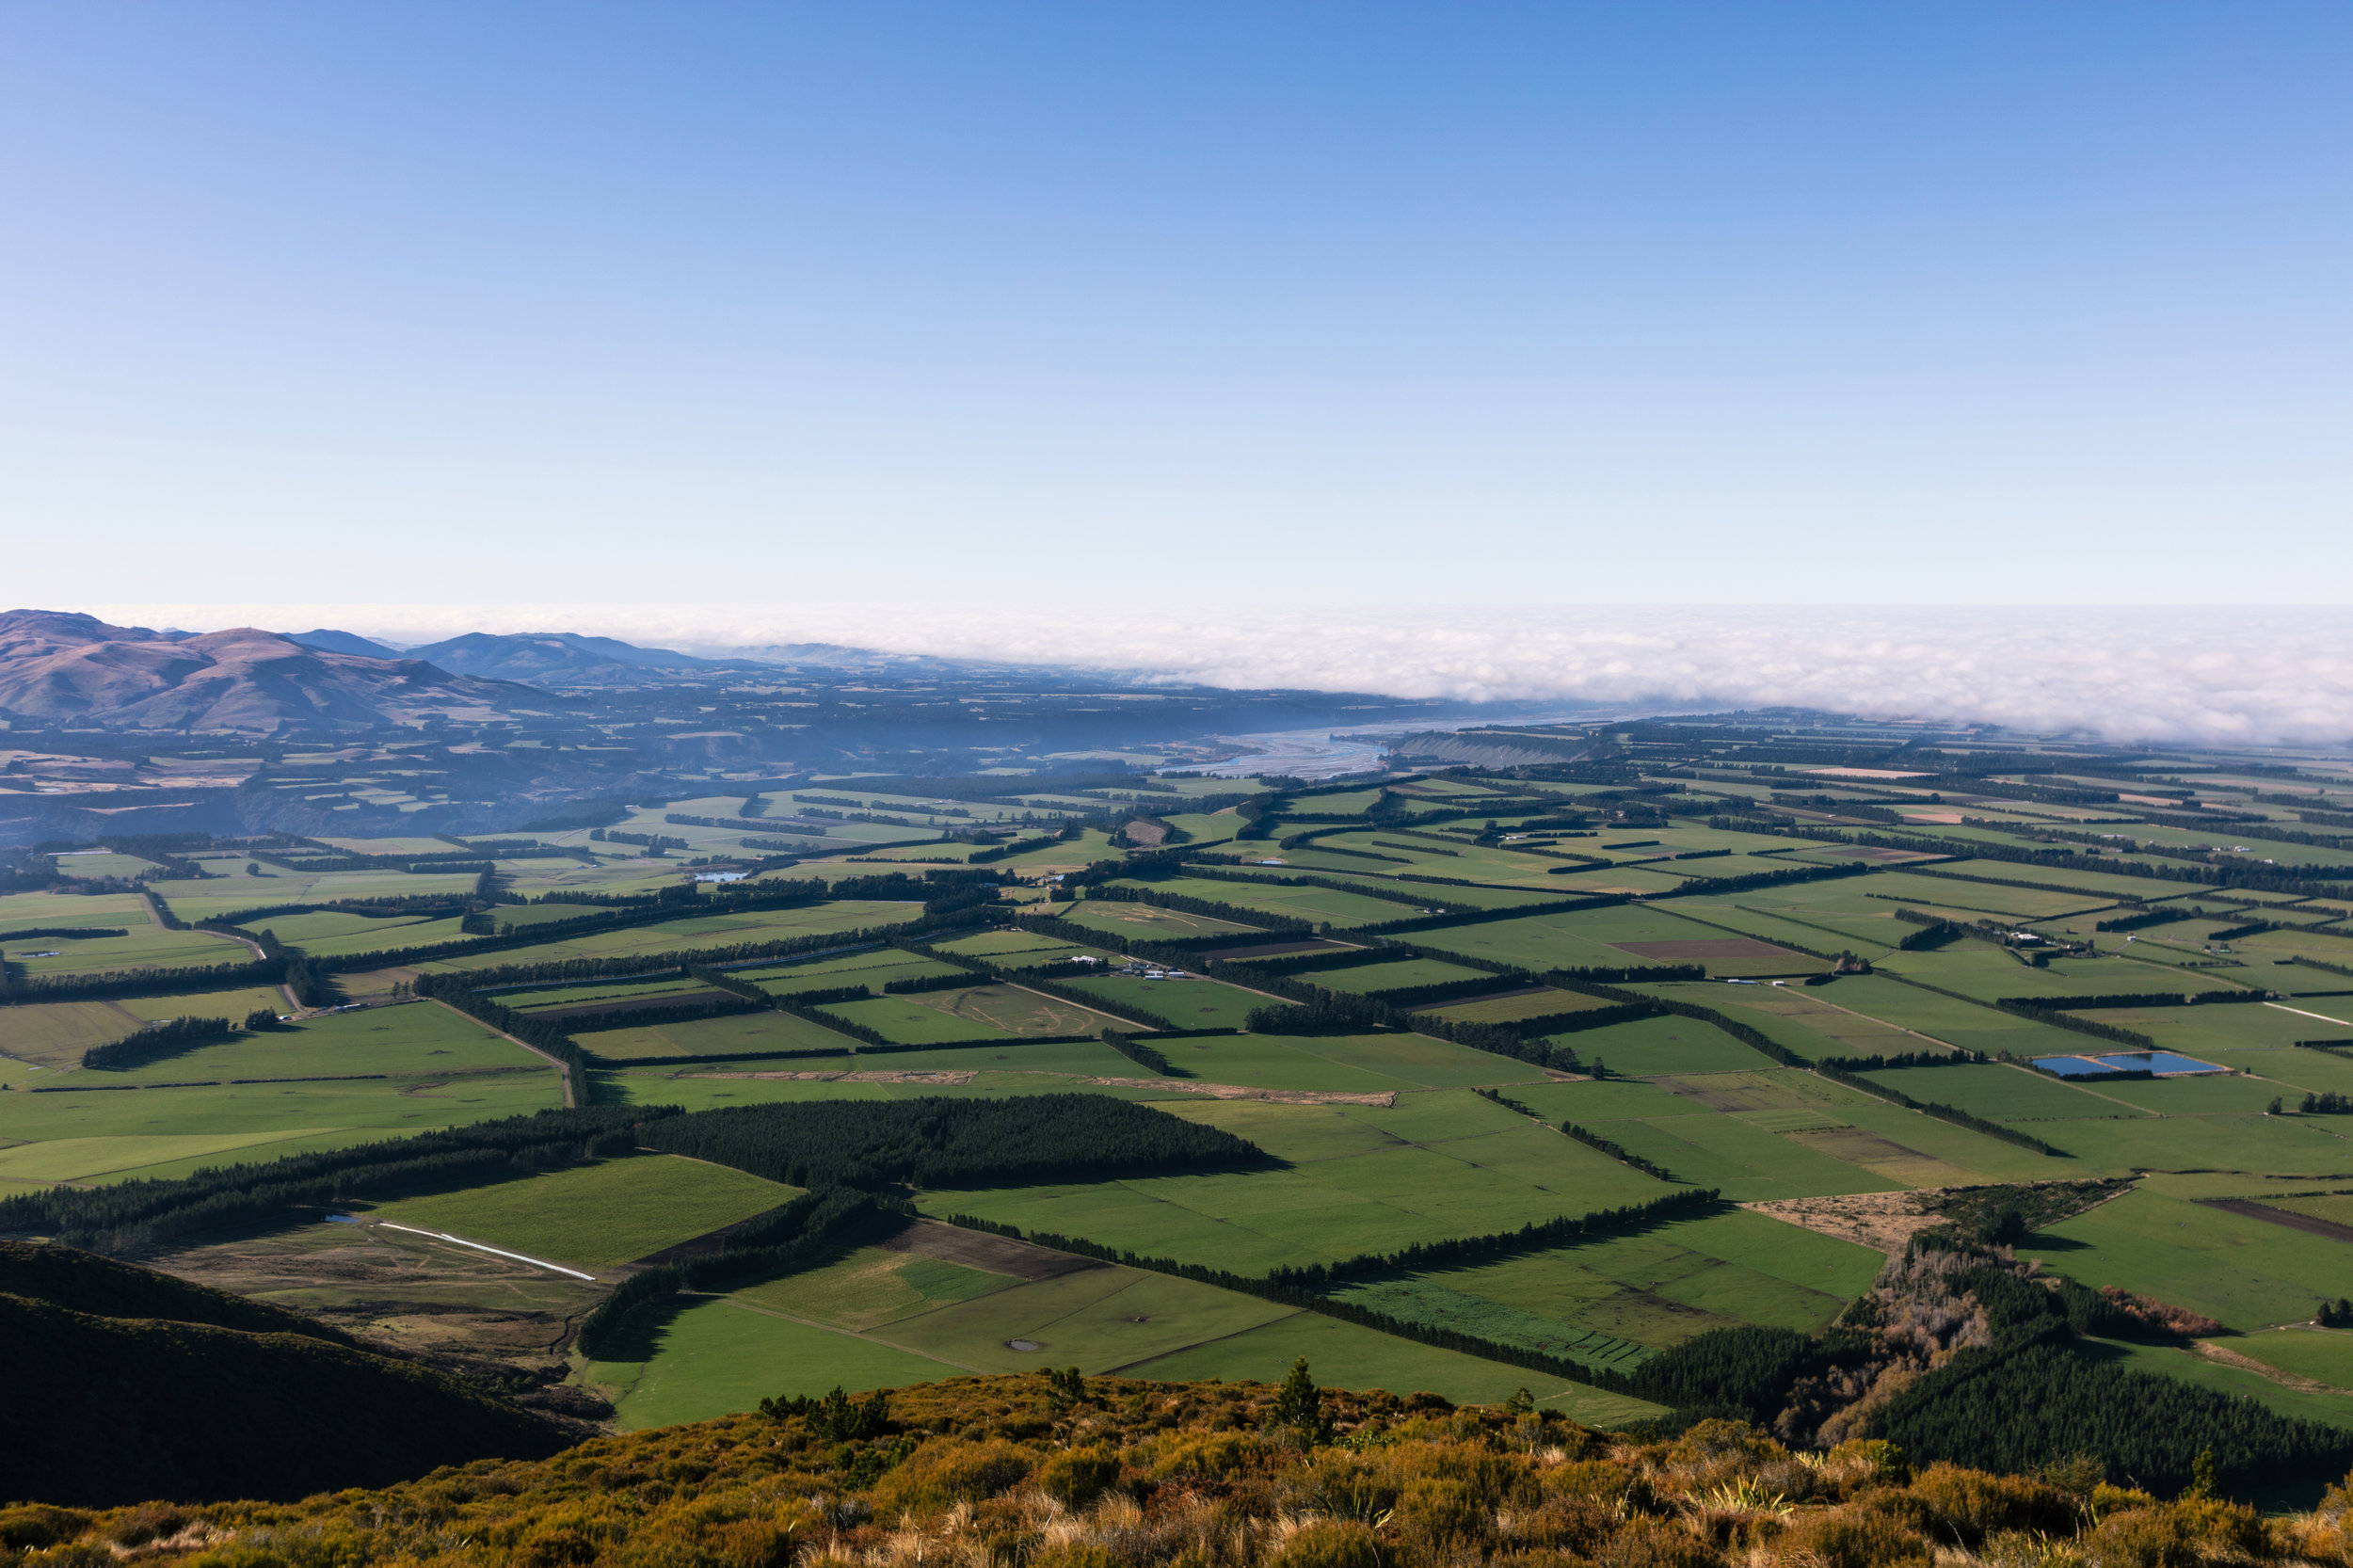  IoT solutions for water management at a southern New Zealand farm 